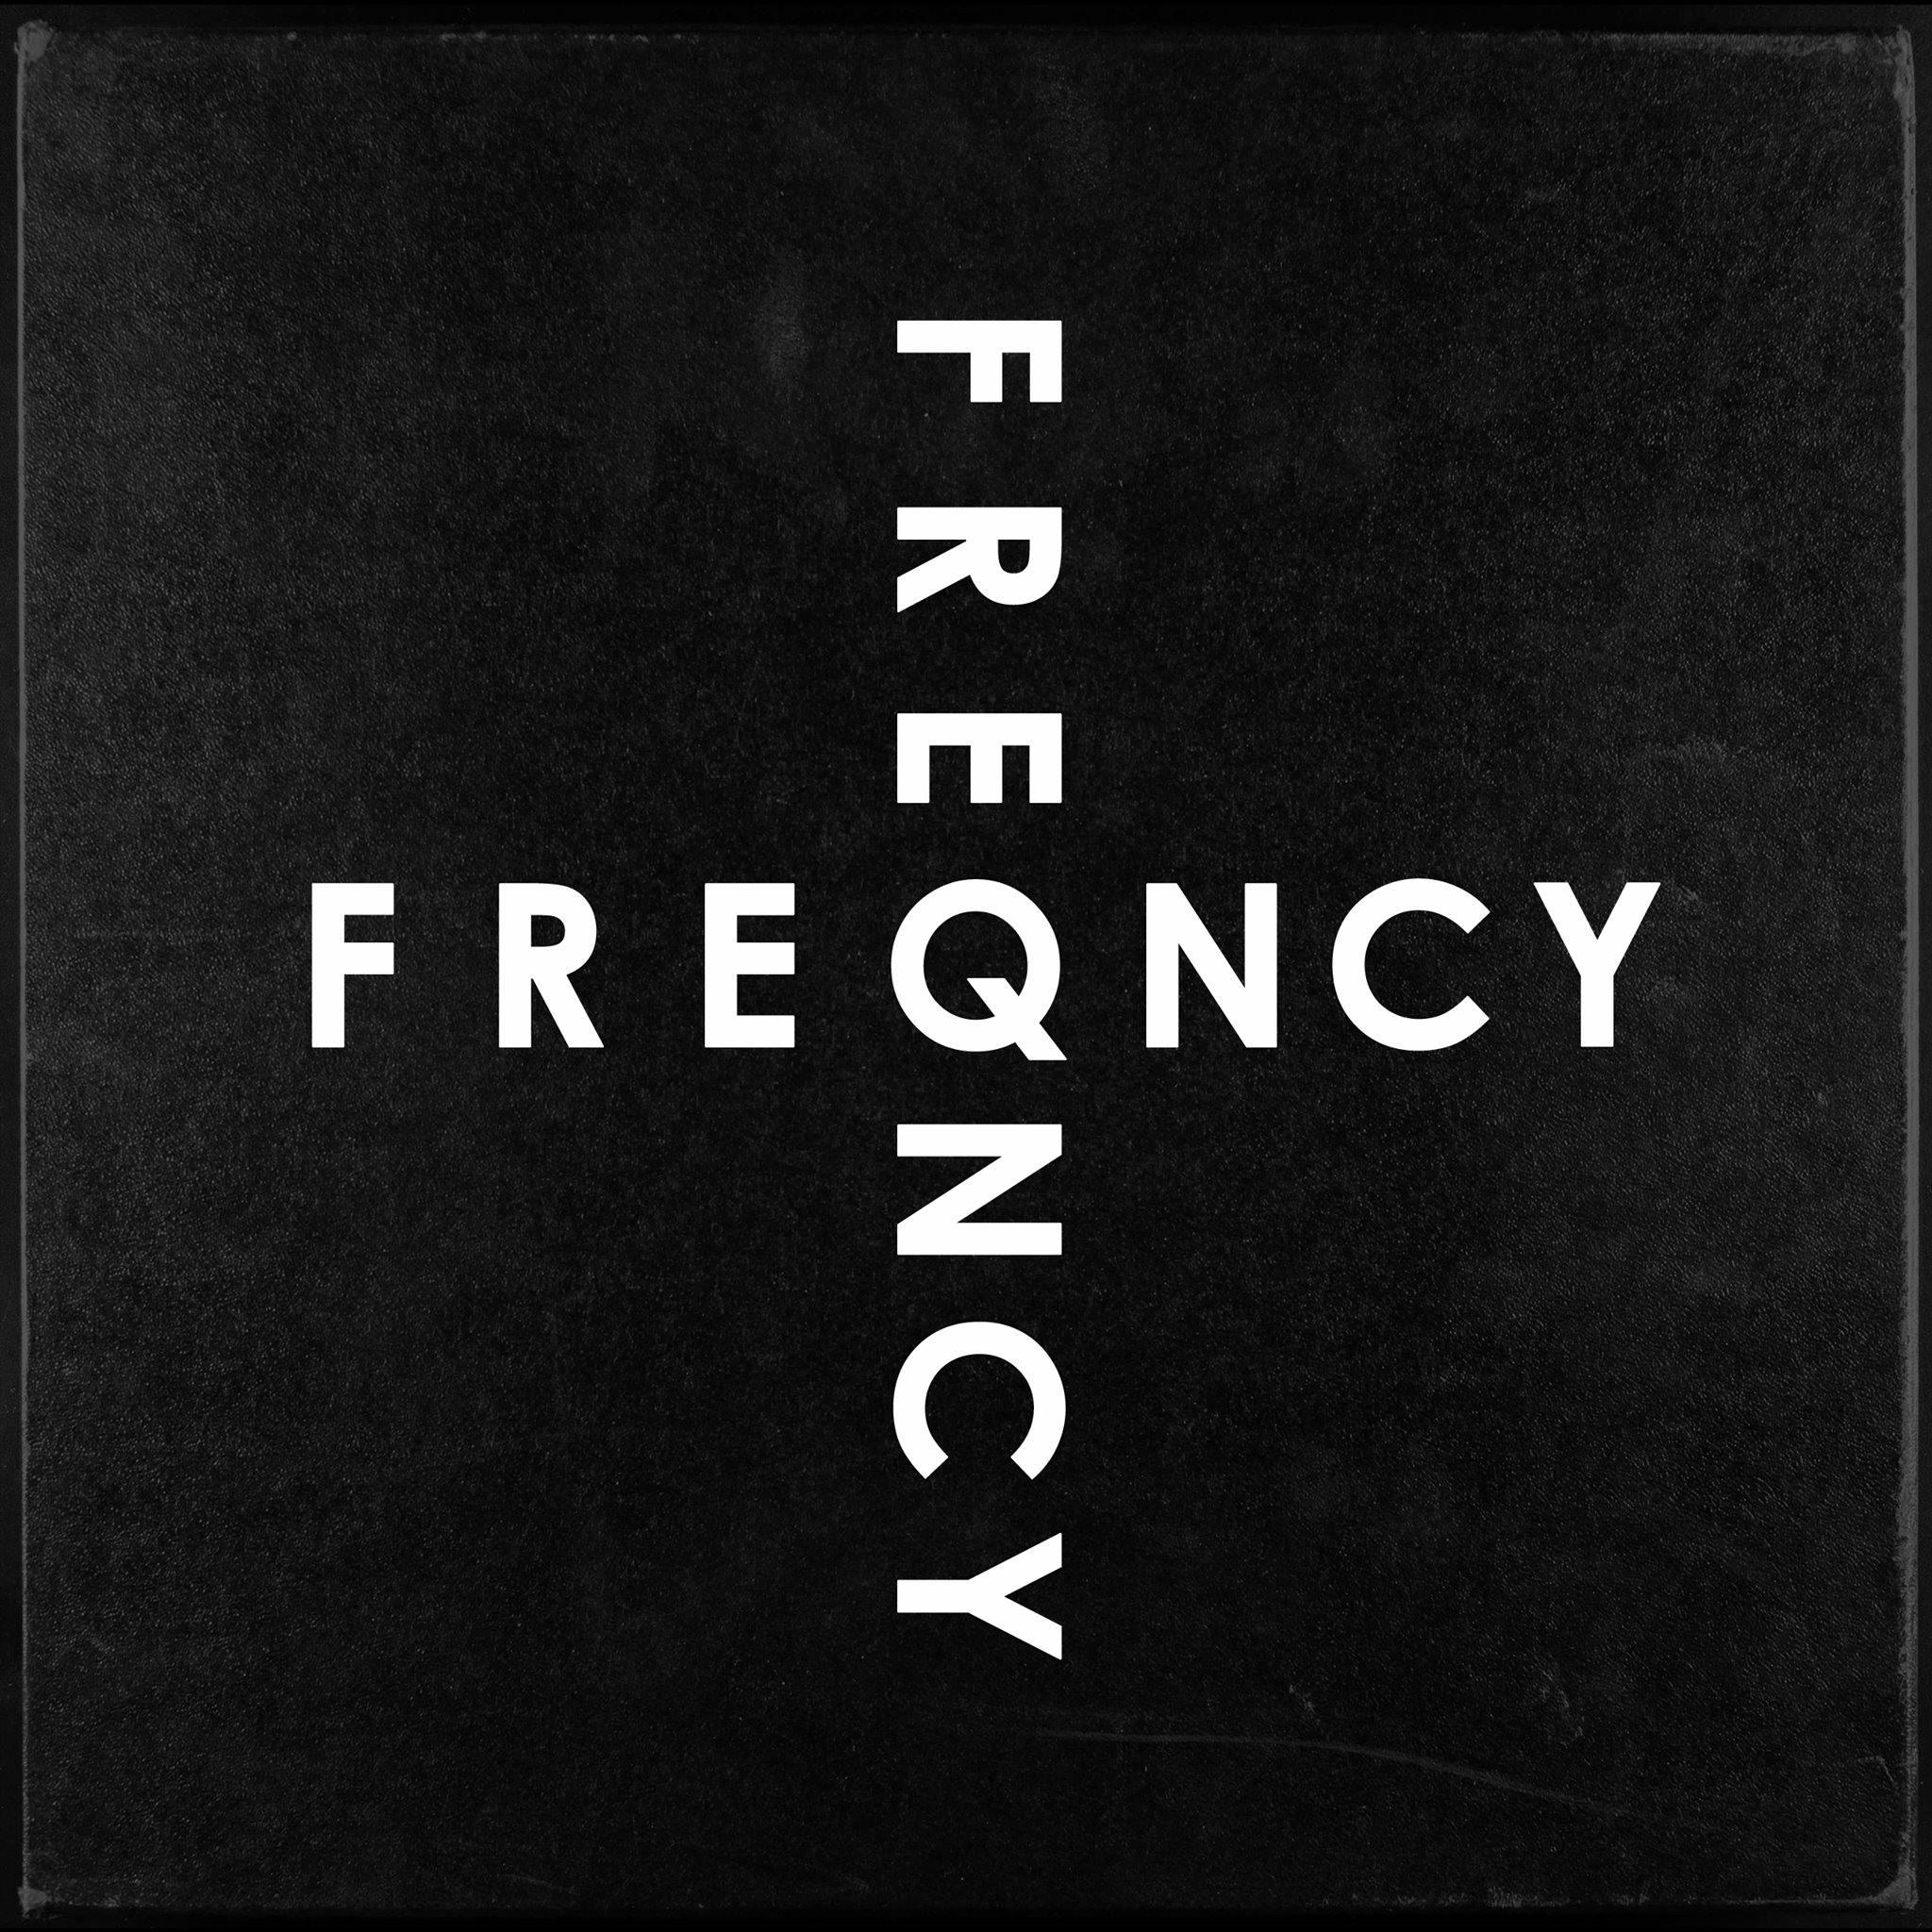 FREQNCY